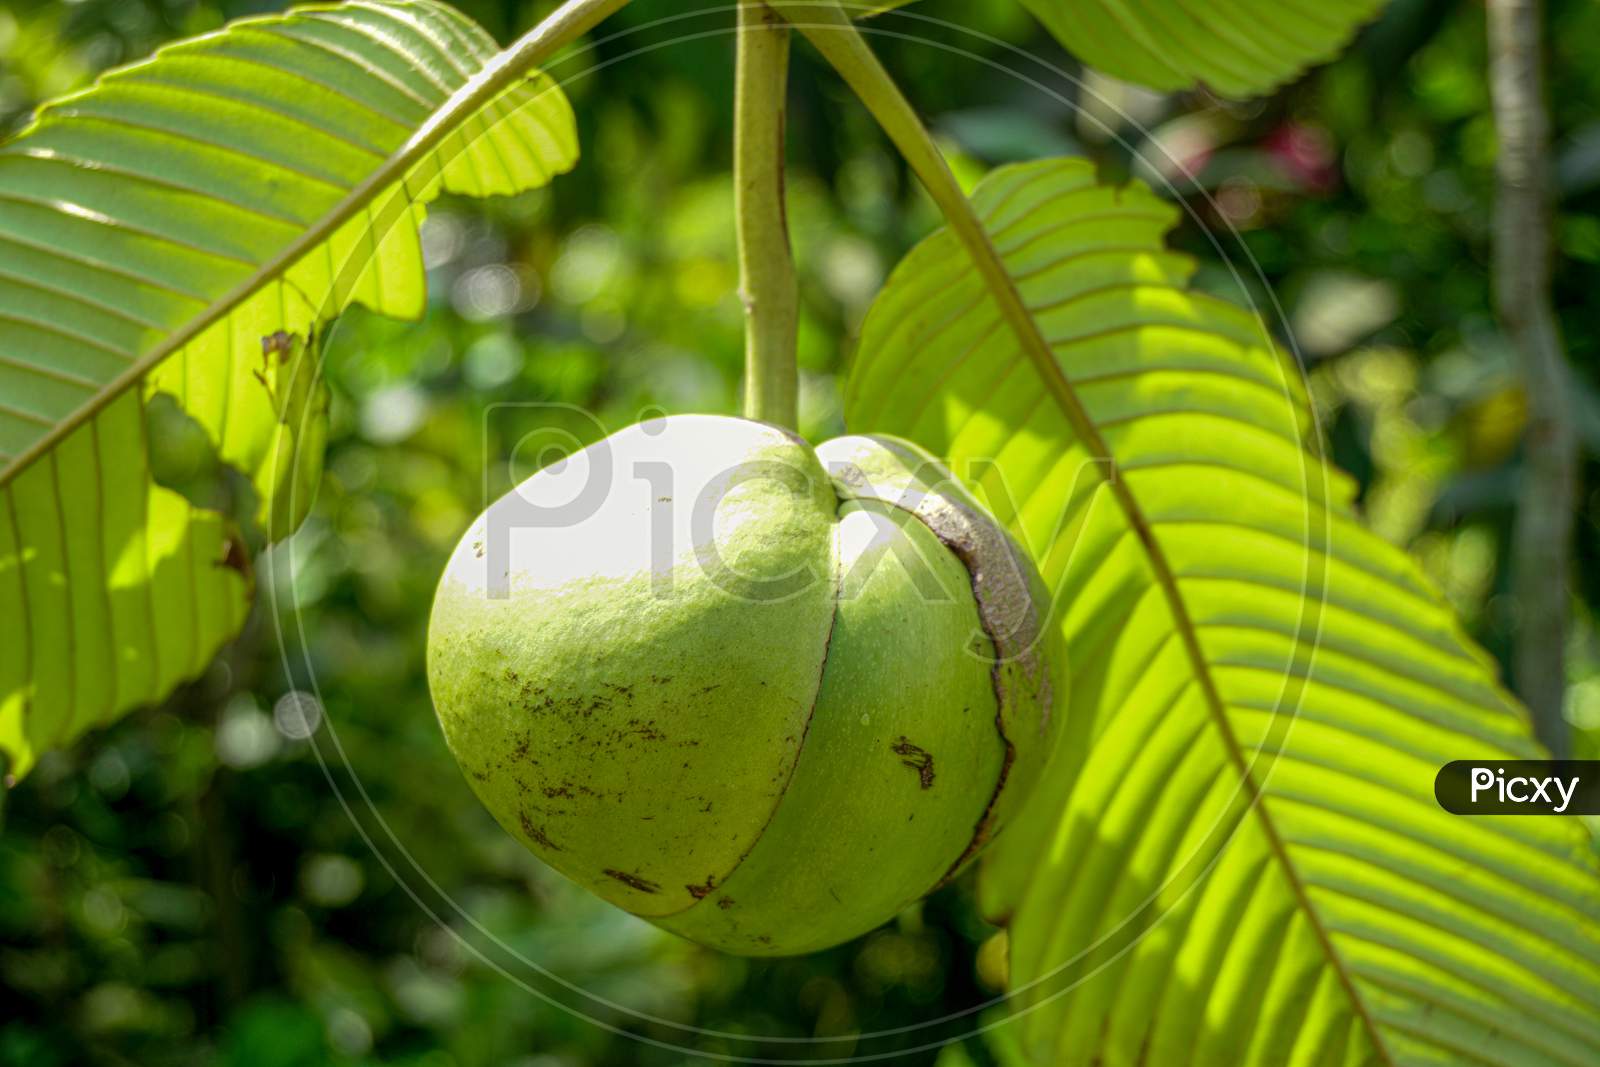 Chalta Is Hanging On The Tree. Dillenia Indica, Commonly Known As Elephant Apple, Is A Species Of Elephant Apple Native To China And Tropical Asia.